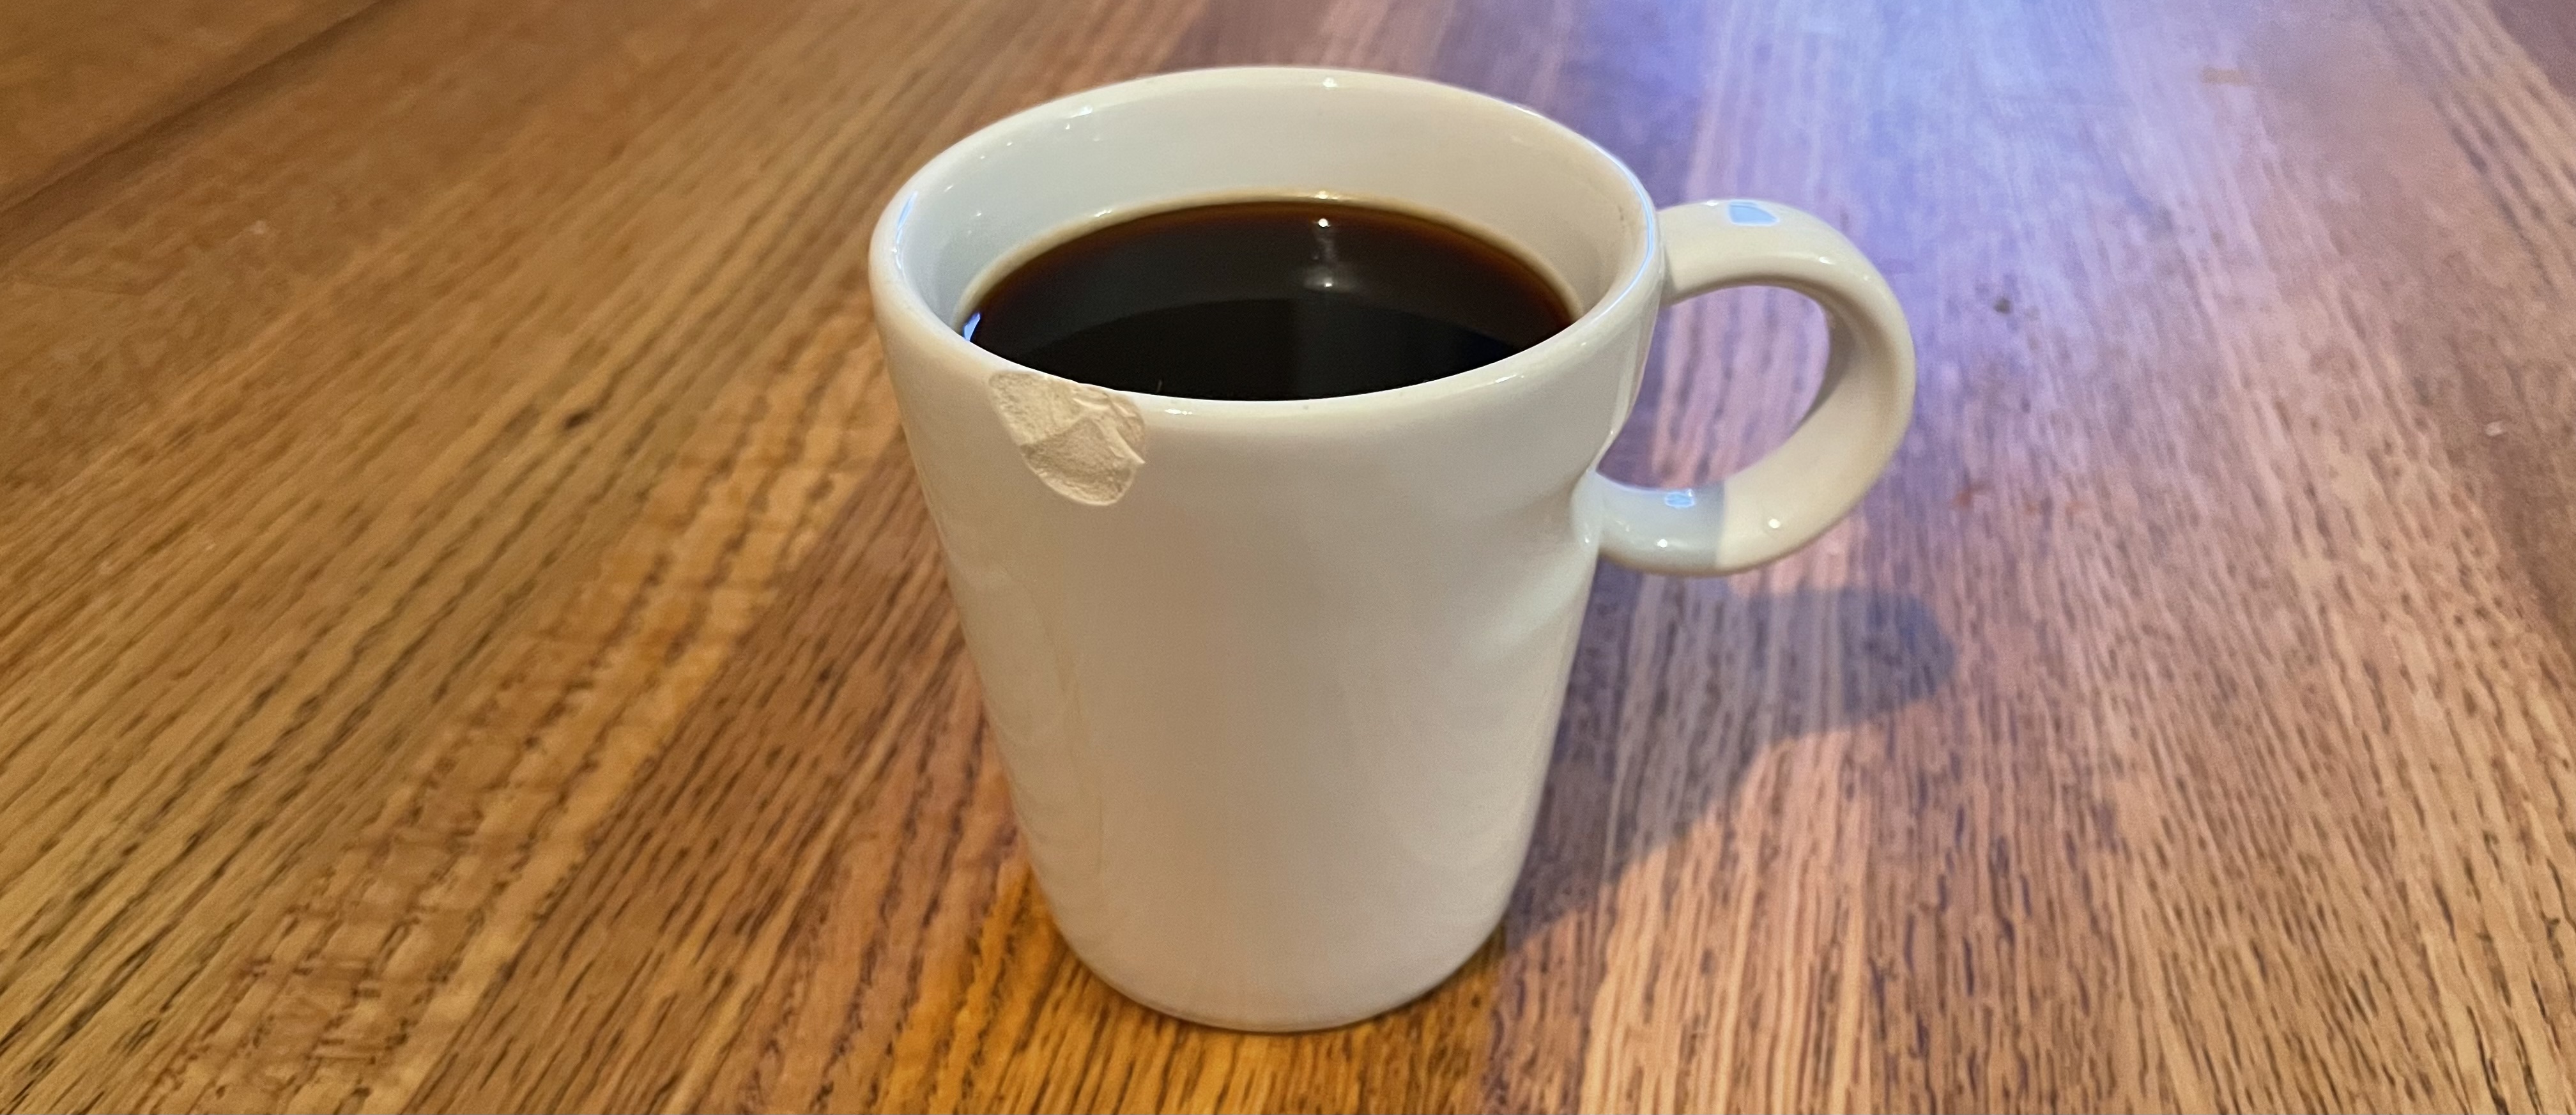 A chipped cup of coffee